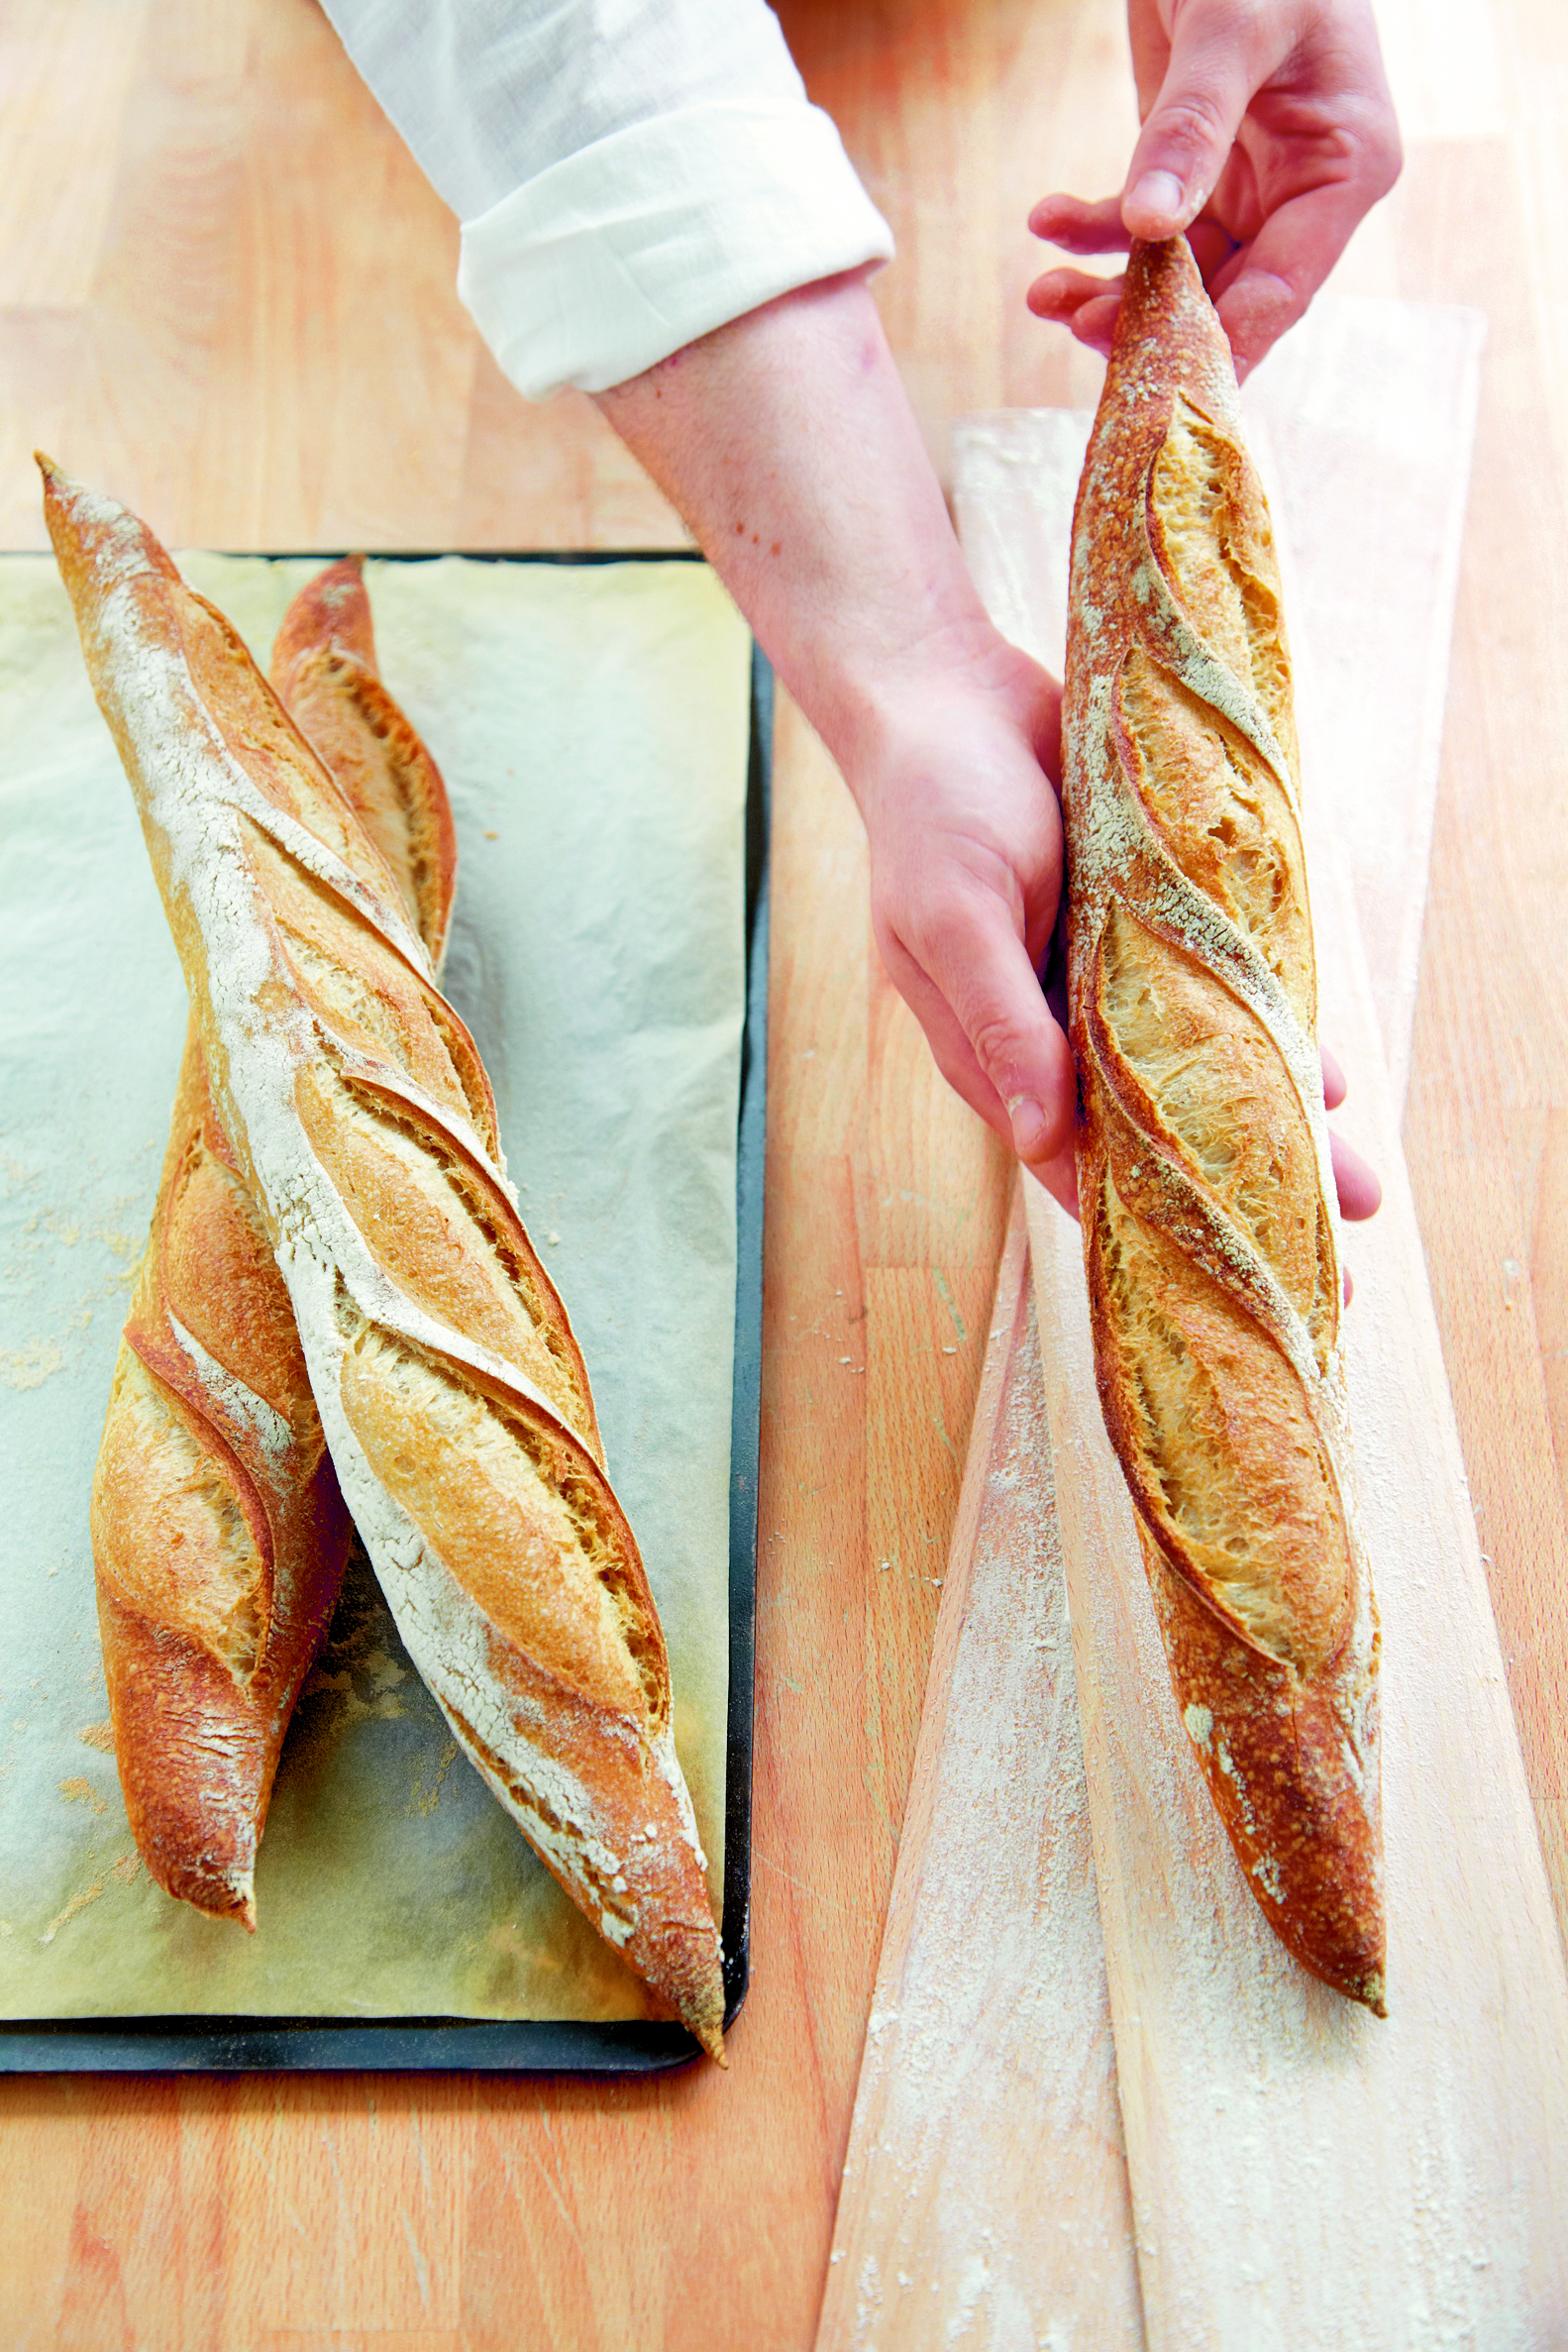 Baguettes, as featured in The Larousse Book of Bread